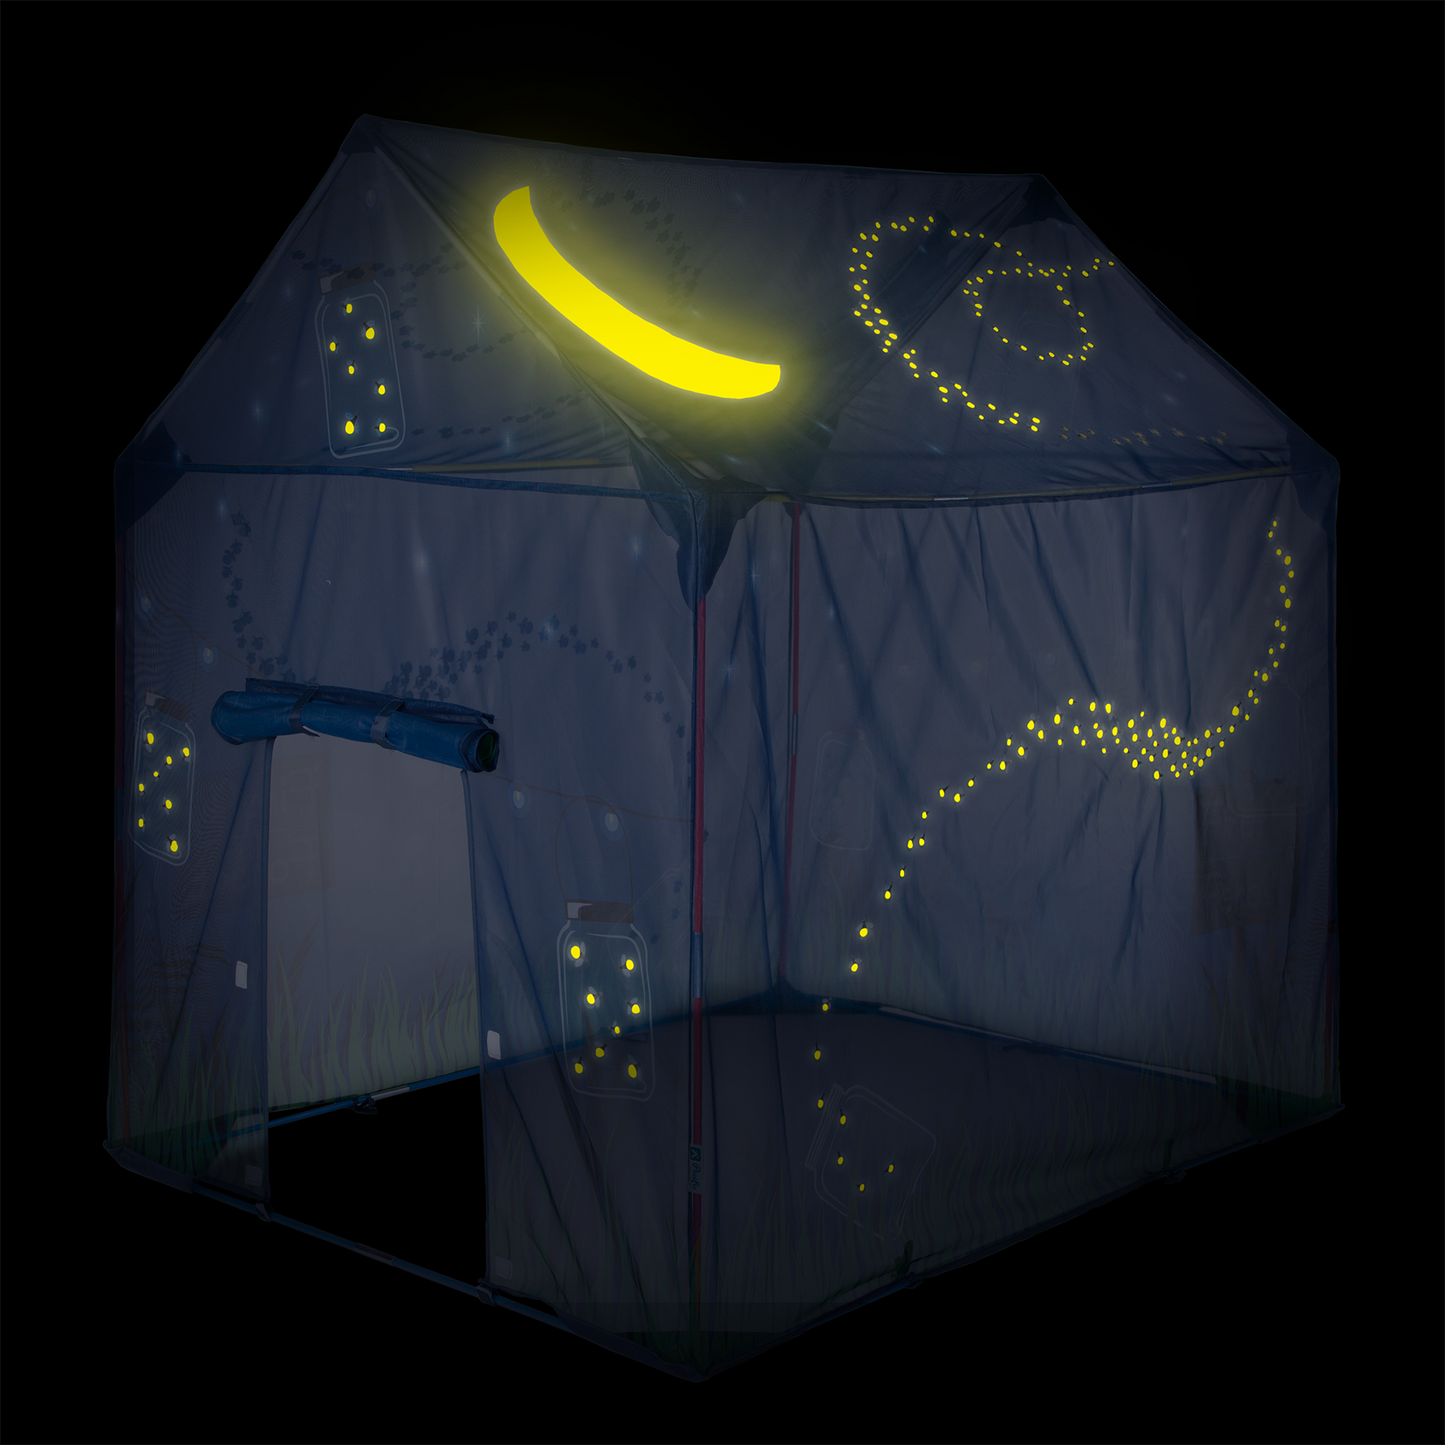 FIREFLY GLOW IN THE DARK PLAY TENT